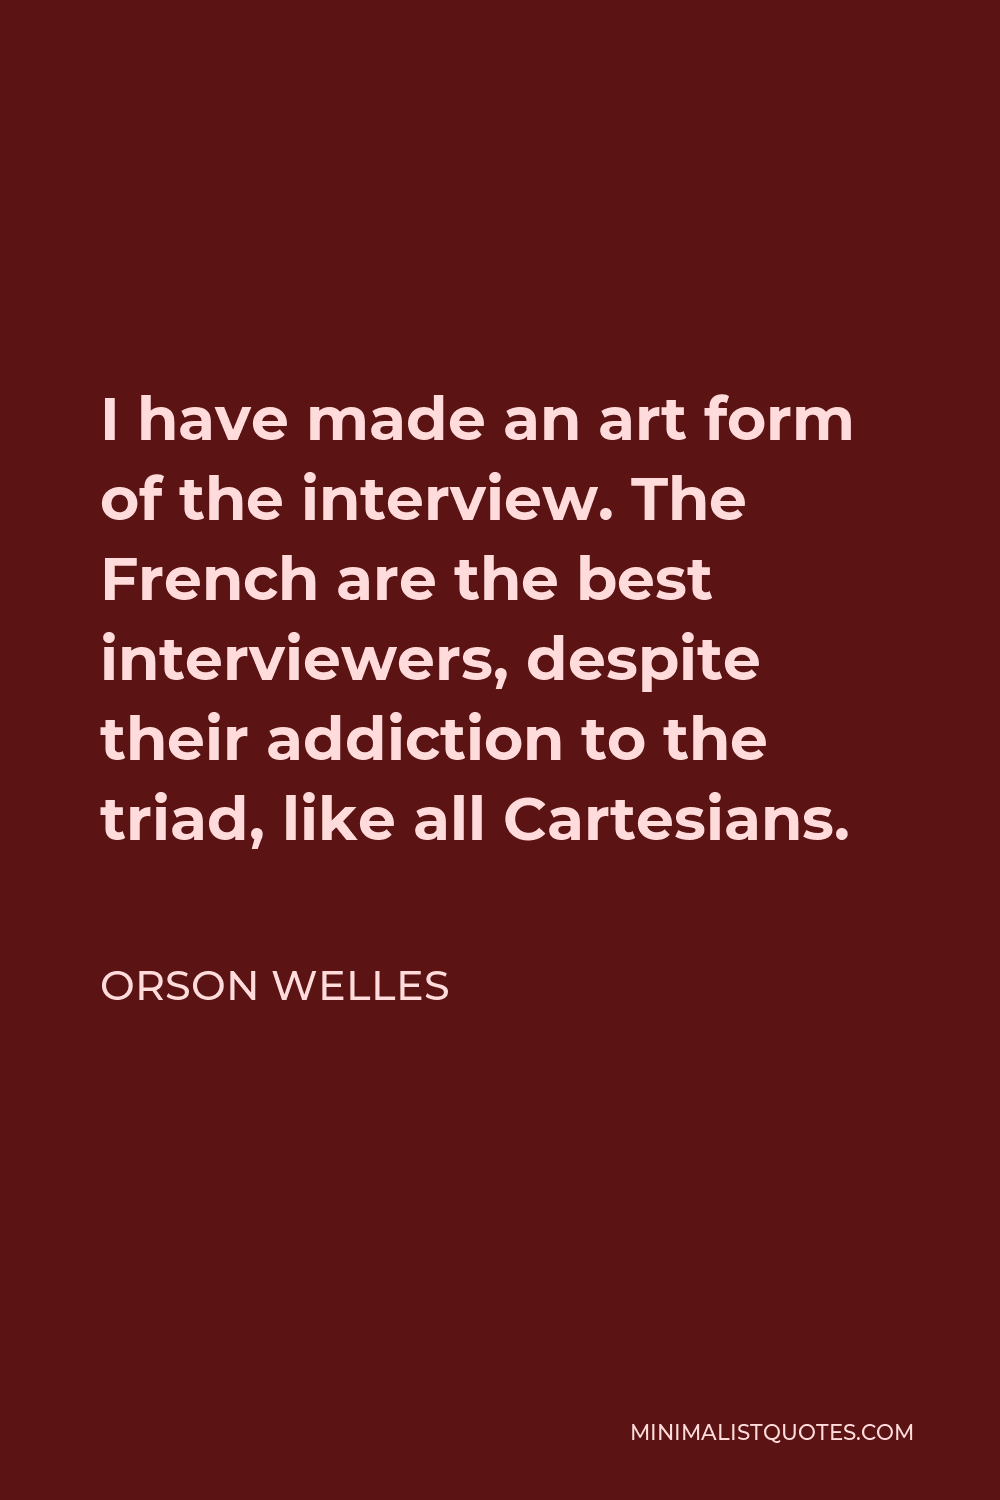 Orson Welles Quote - I have made an art form of the interview. The French are the best interviewers, despite their addiction to the triad, like all Cartesians.